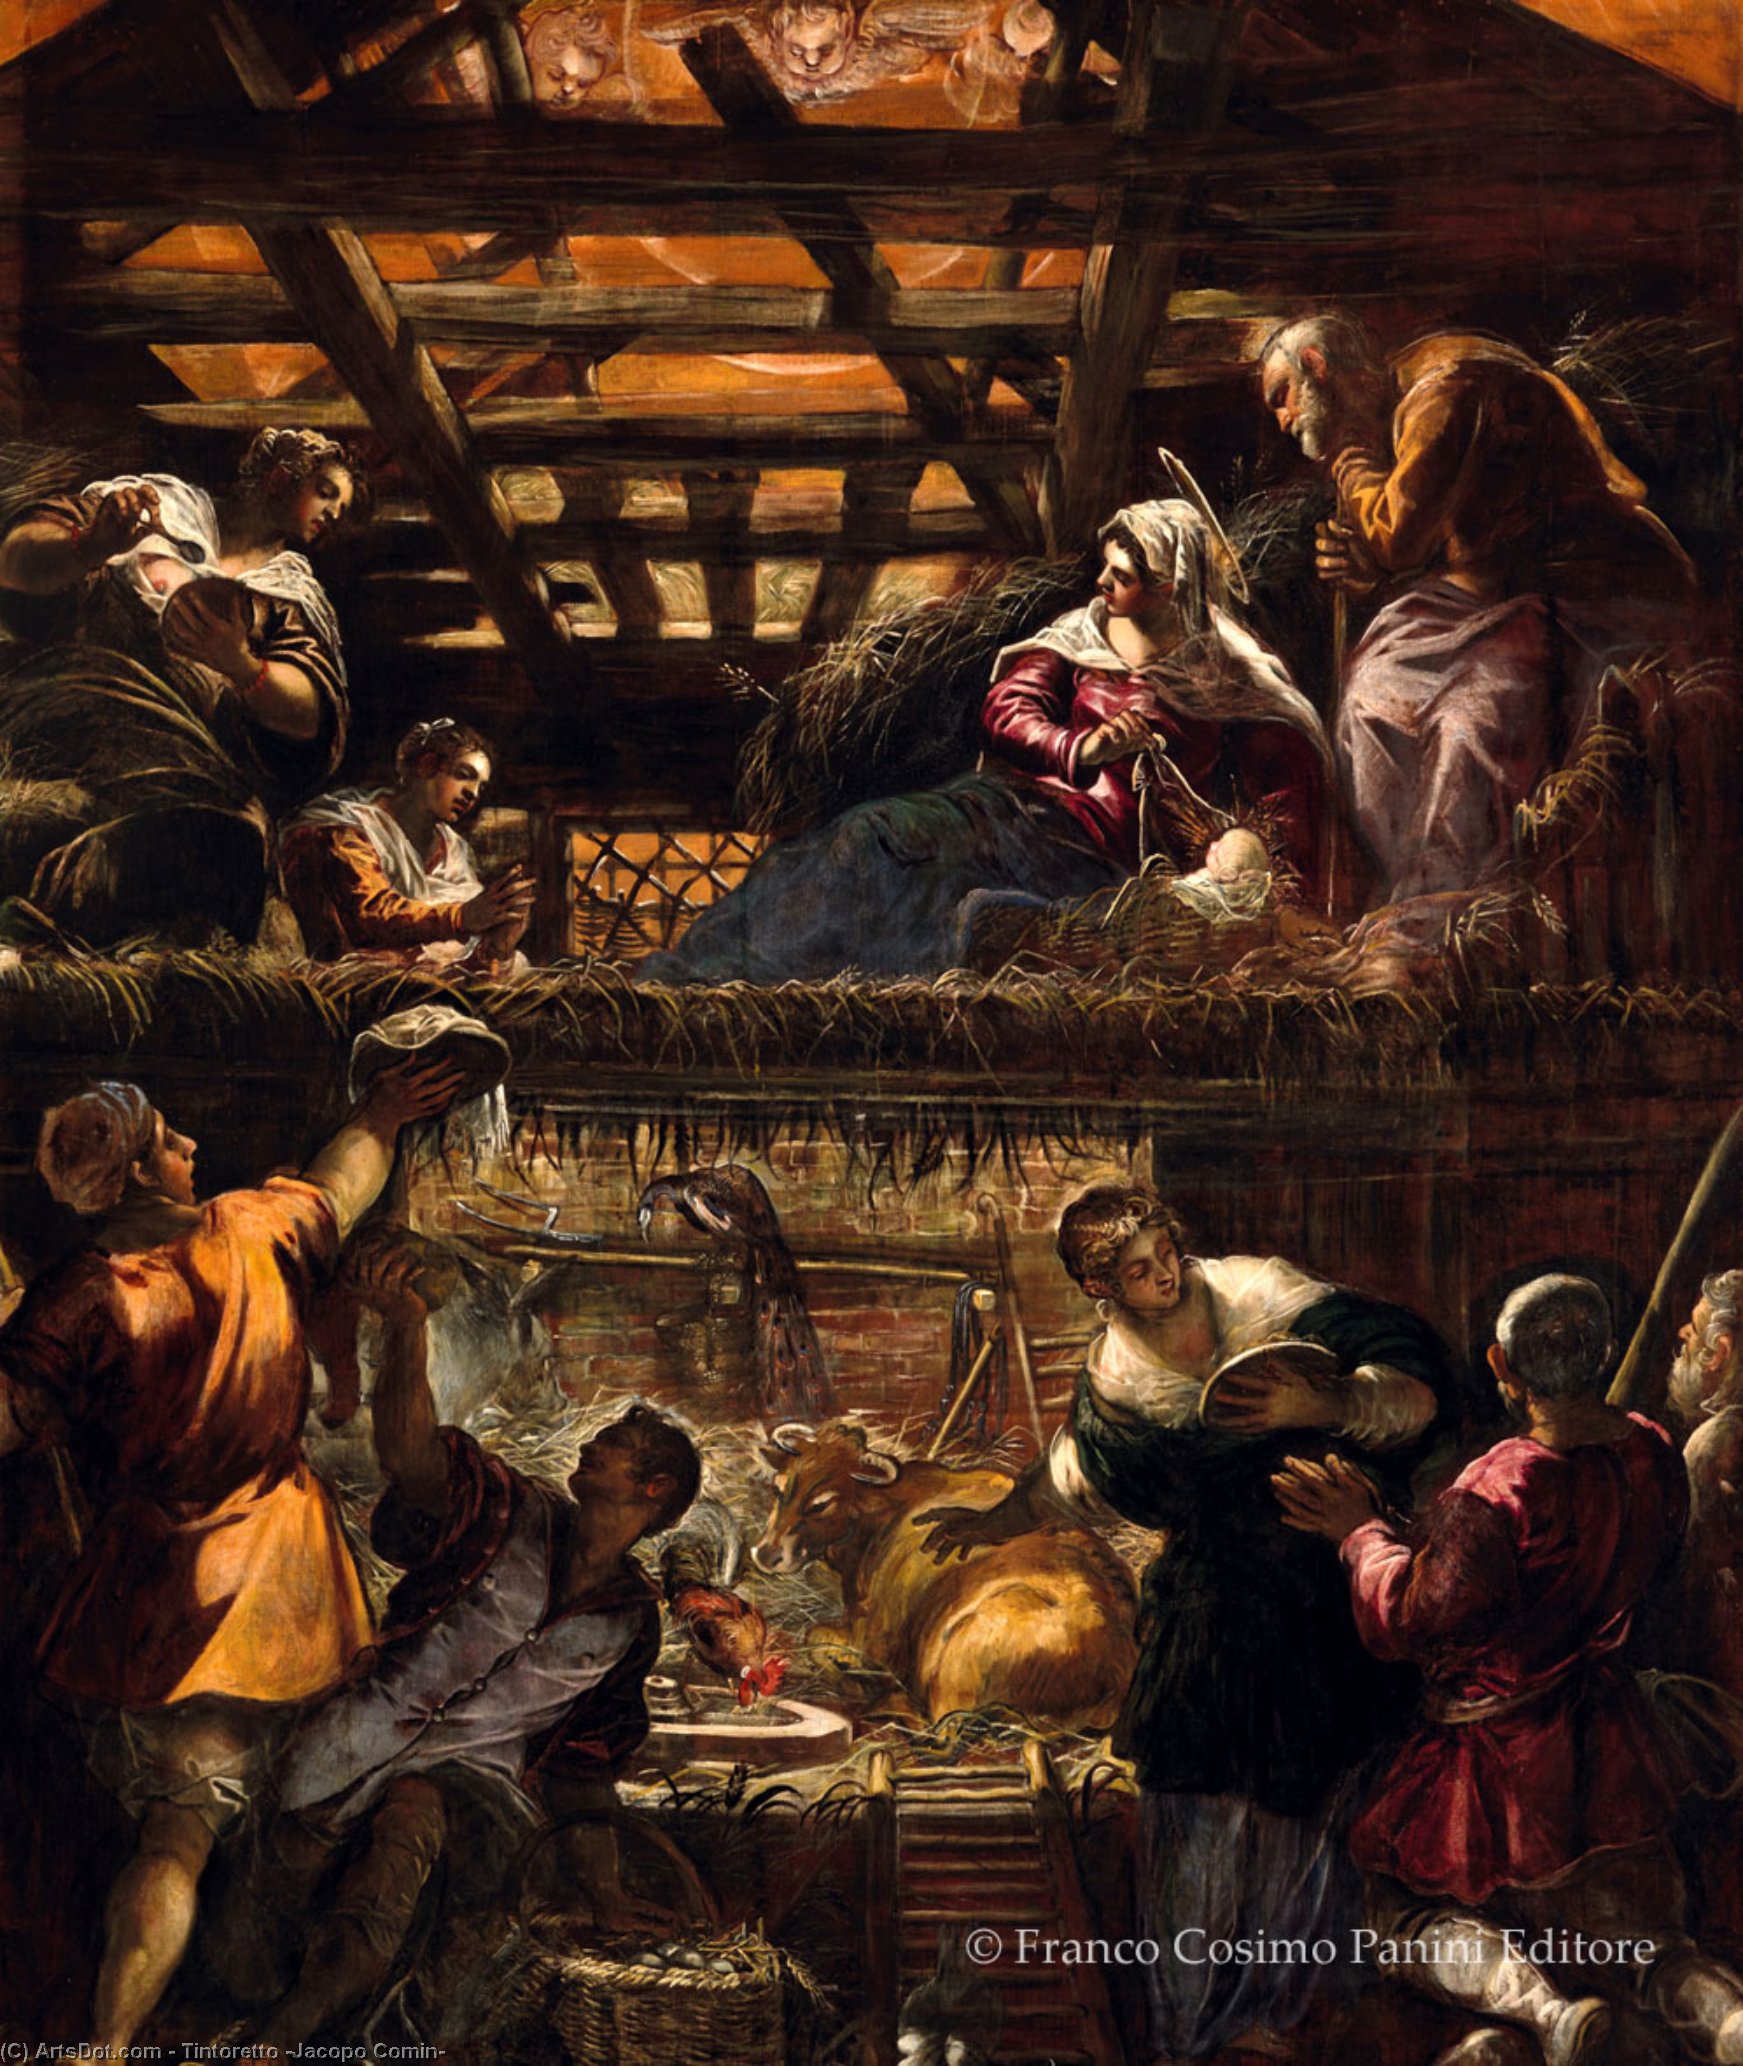 Buy Museum Art Reproductions The Adoration of the Shepherds, 1578 by Tintoretto (Jacopo Comin) (1518-1594, Italy) | ArtsDot.com